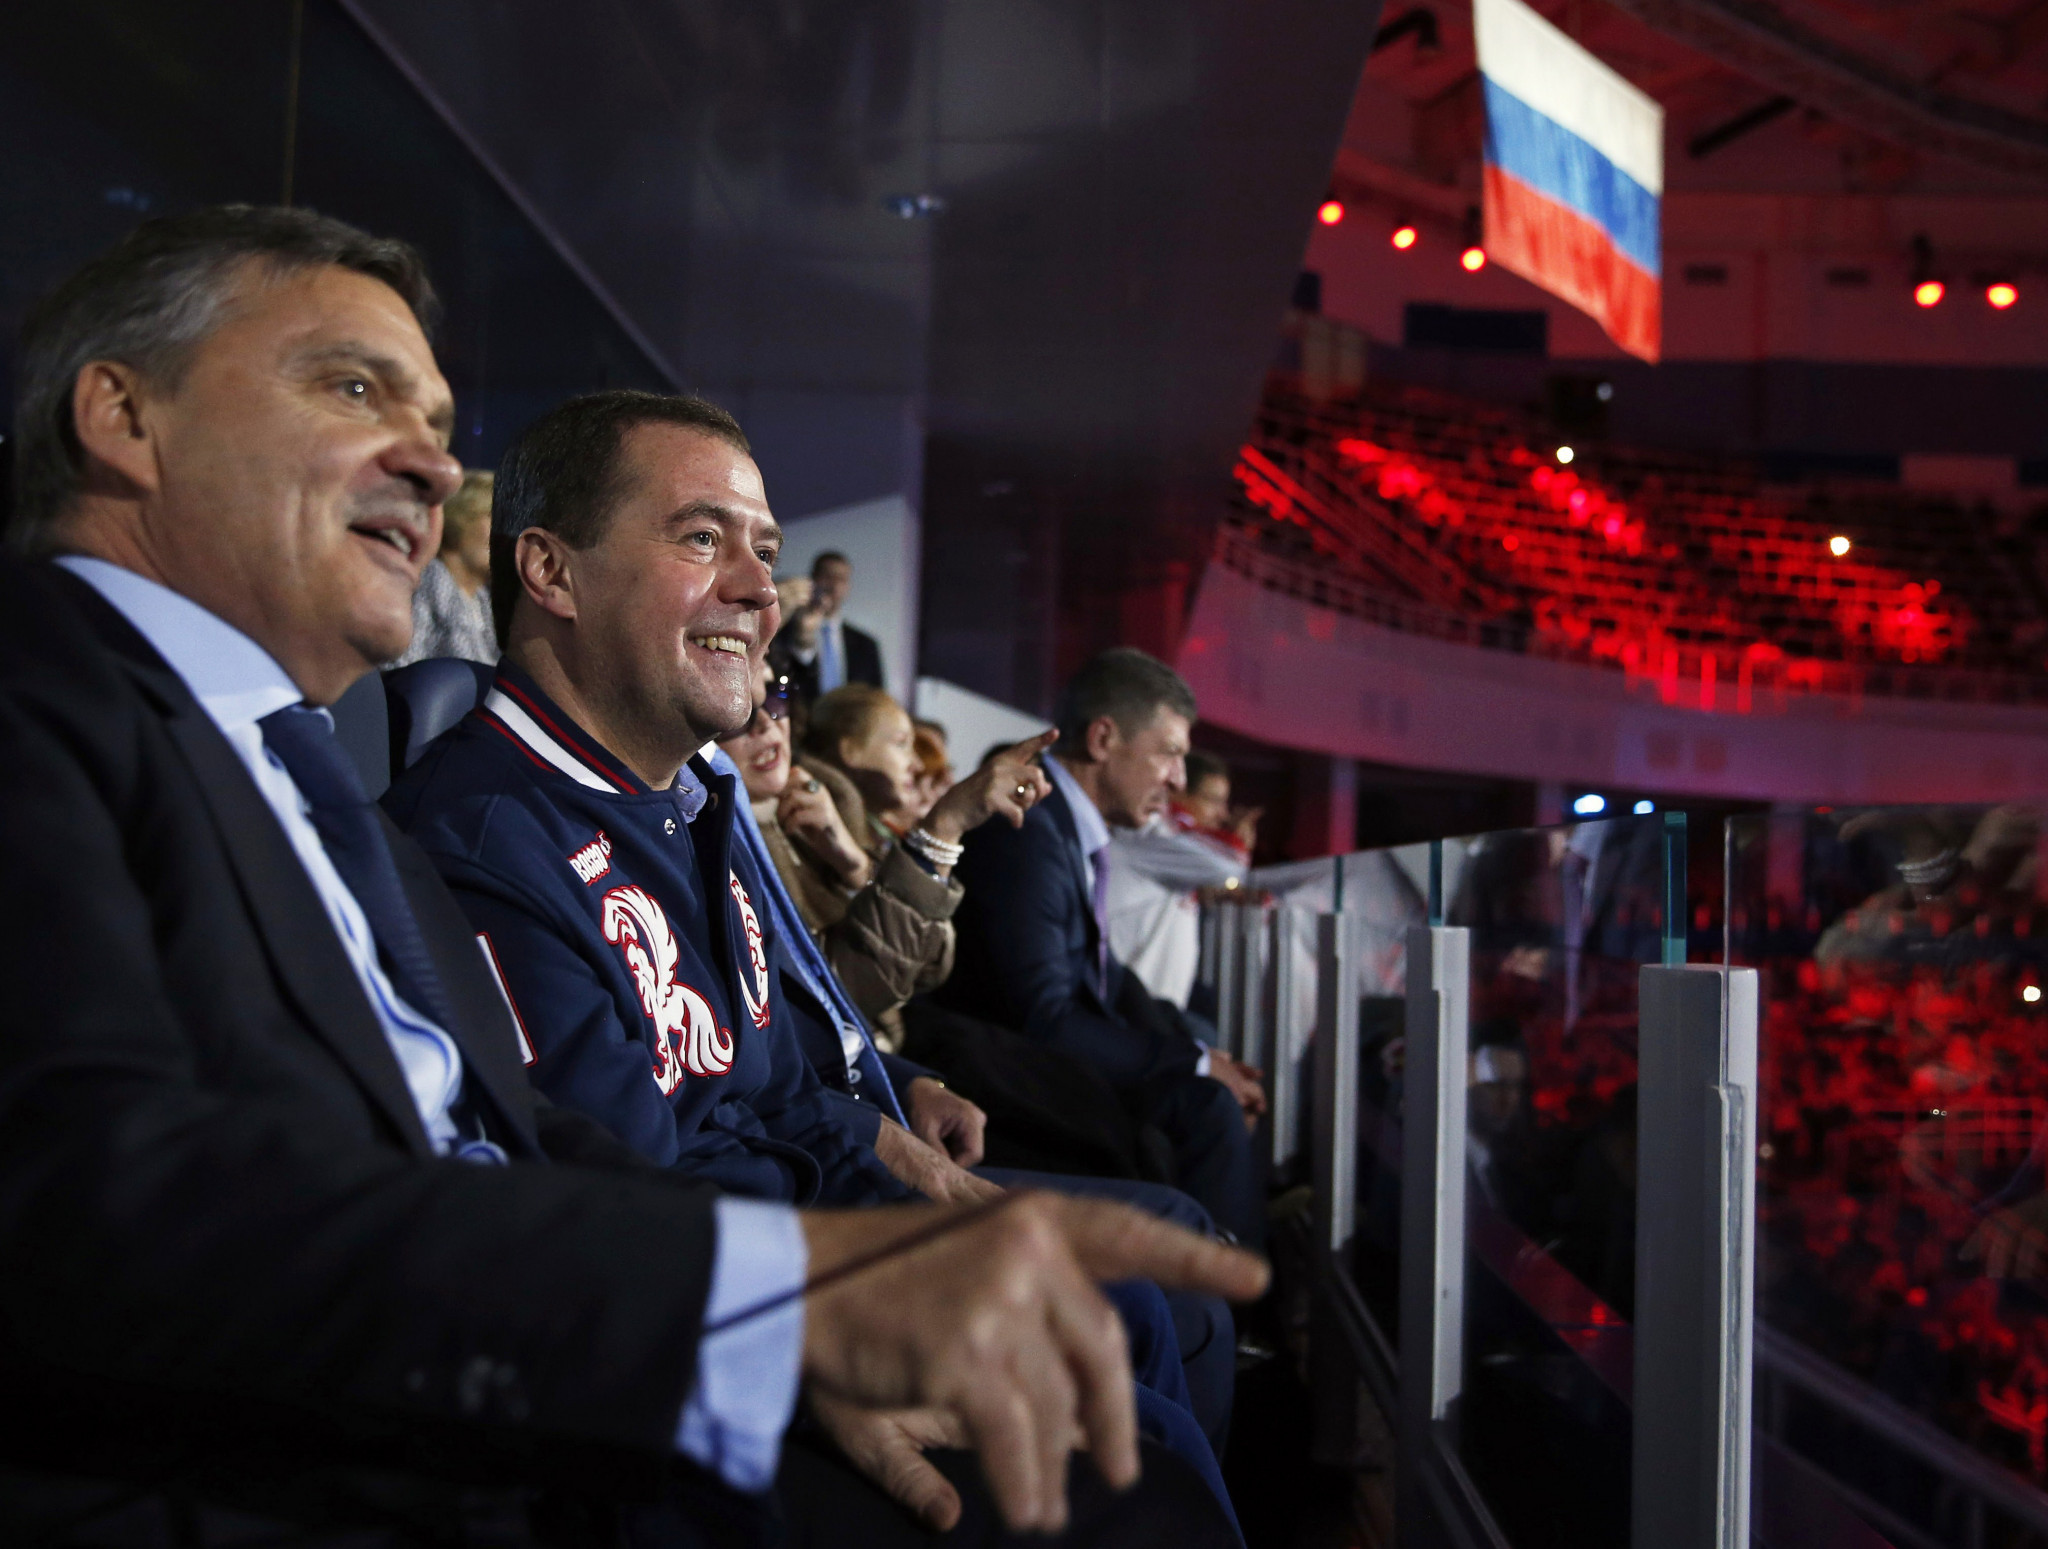 René Fasel, pictured with former President Dmitry Medvedev, has claimed "I Love Russians" and that the invasion of Ukraine cannot diminish his love for Russia ©Getty Images